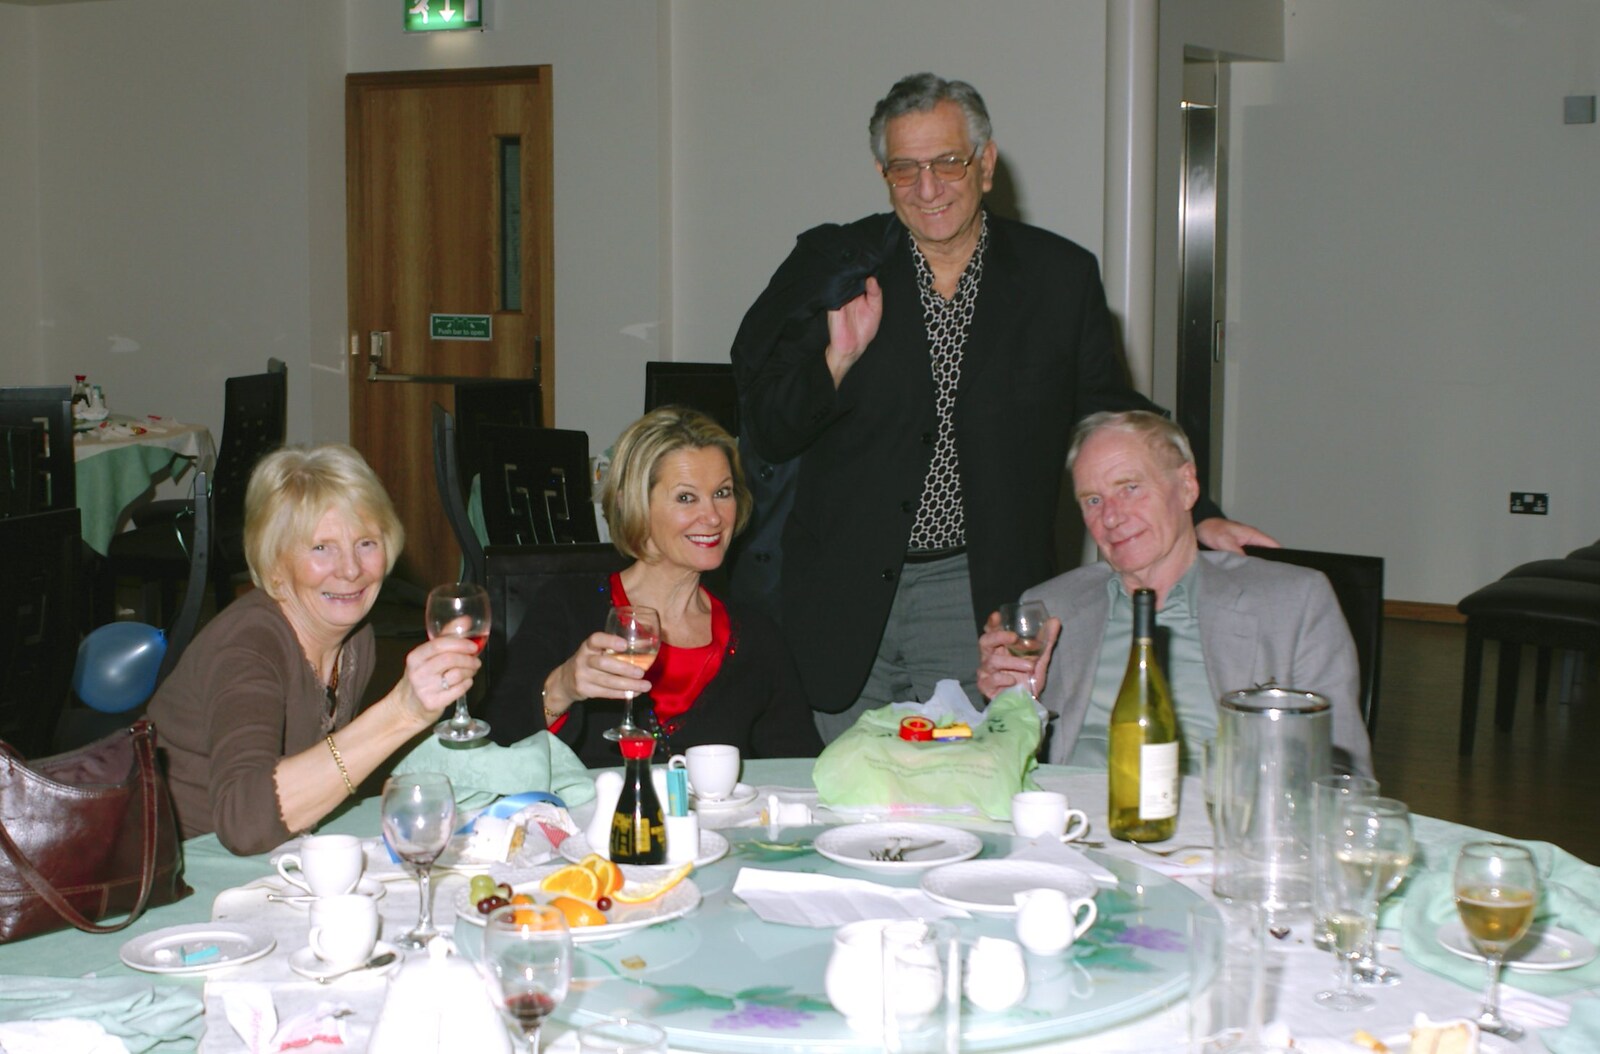 The Old Man's 70th Birthday, Pontefract, West Yorkshire - 29th January 2005: A final toast